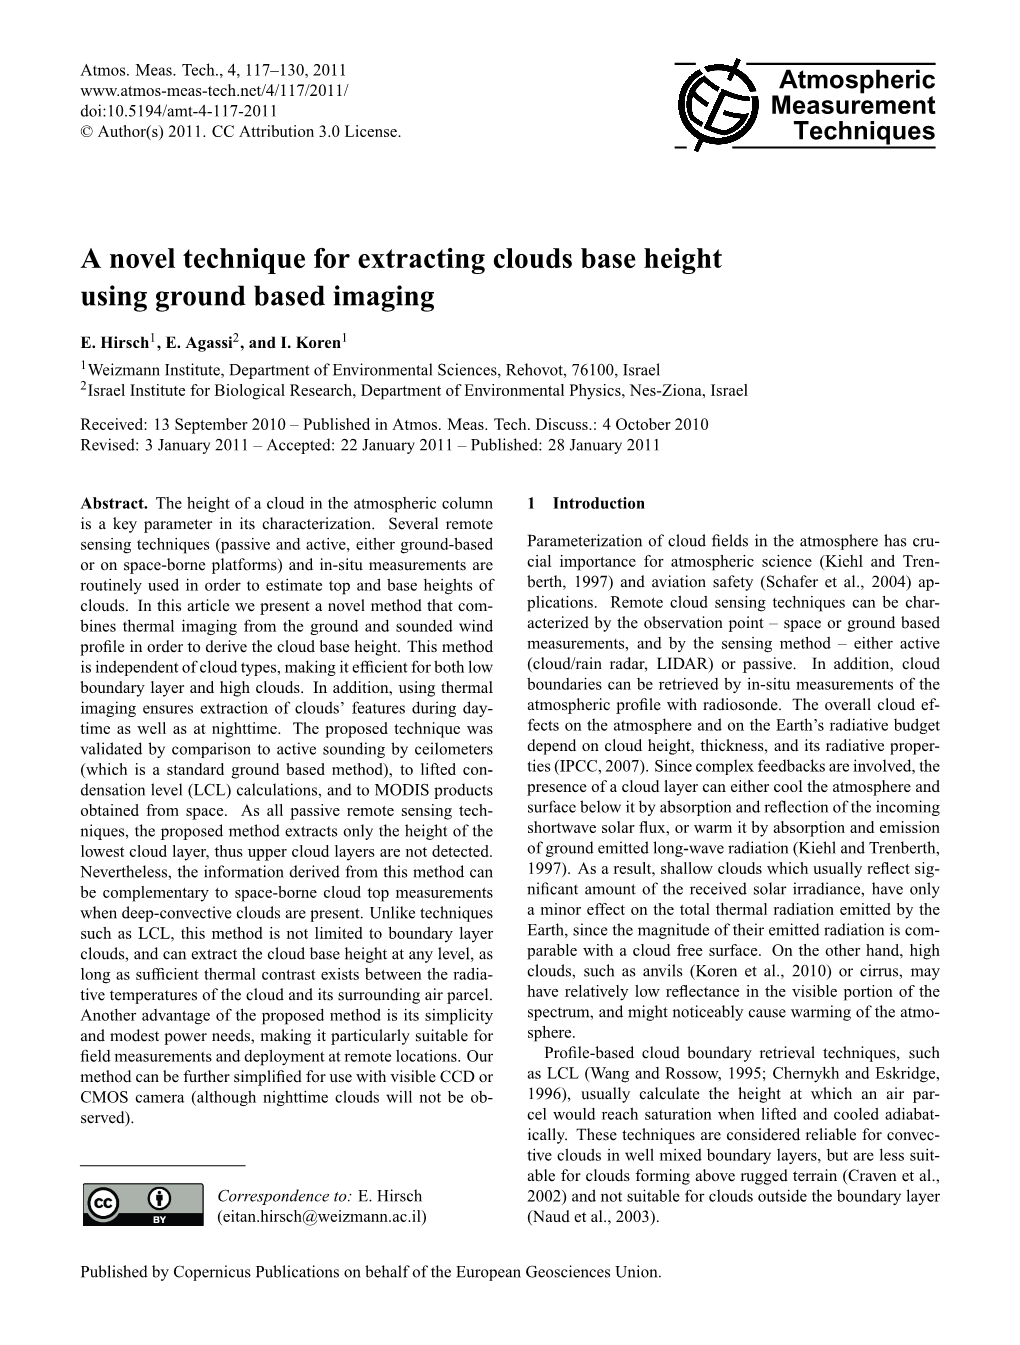 A Novel Technique for Extracting Clouds Base Height Using Ground Based Imaging